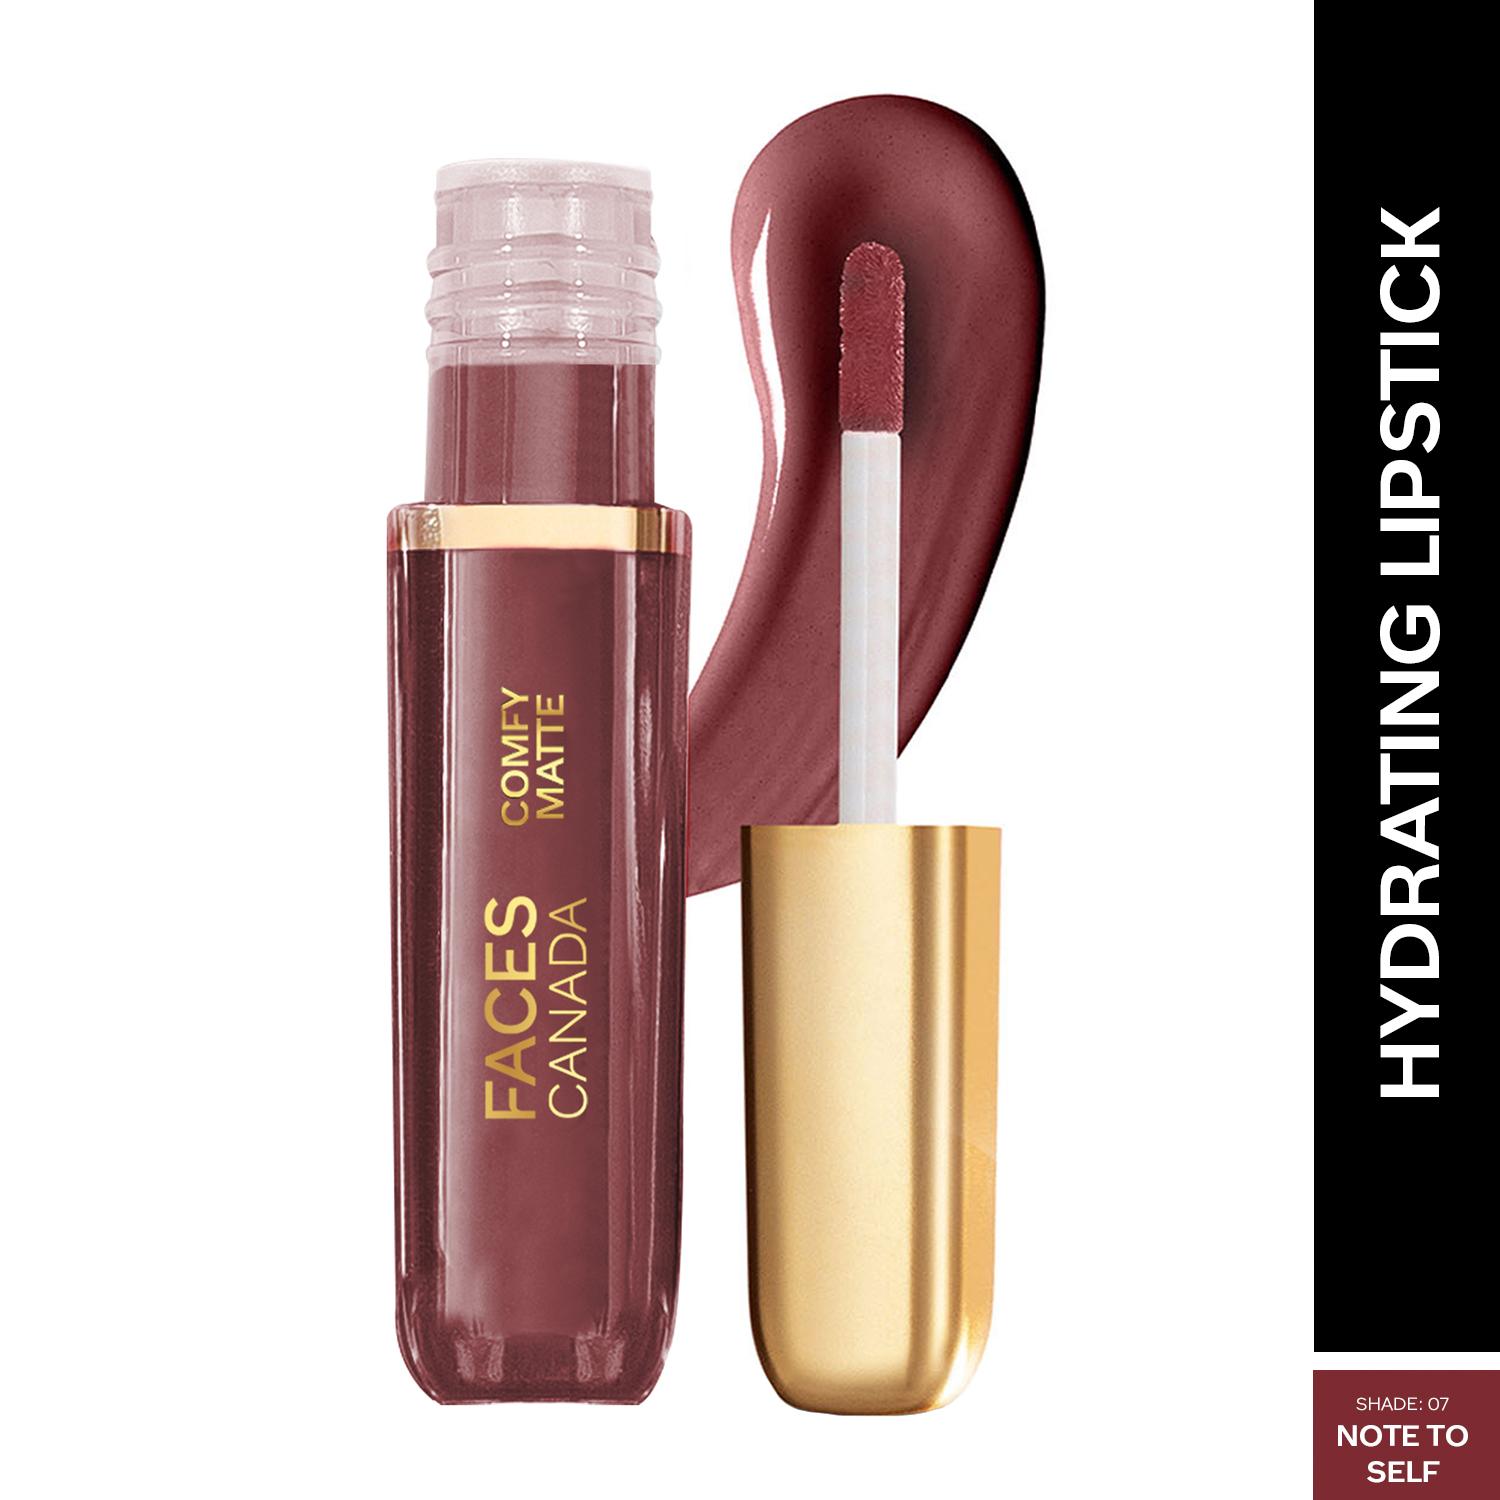 Faces Canada | Faces Canada Comfy Matte Liquid Lipstick, 10HR Stay, No Dryness - Note To Self 07 (3 ml)